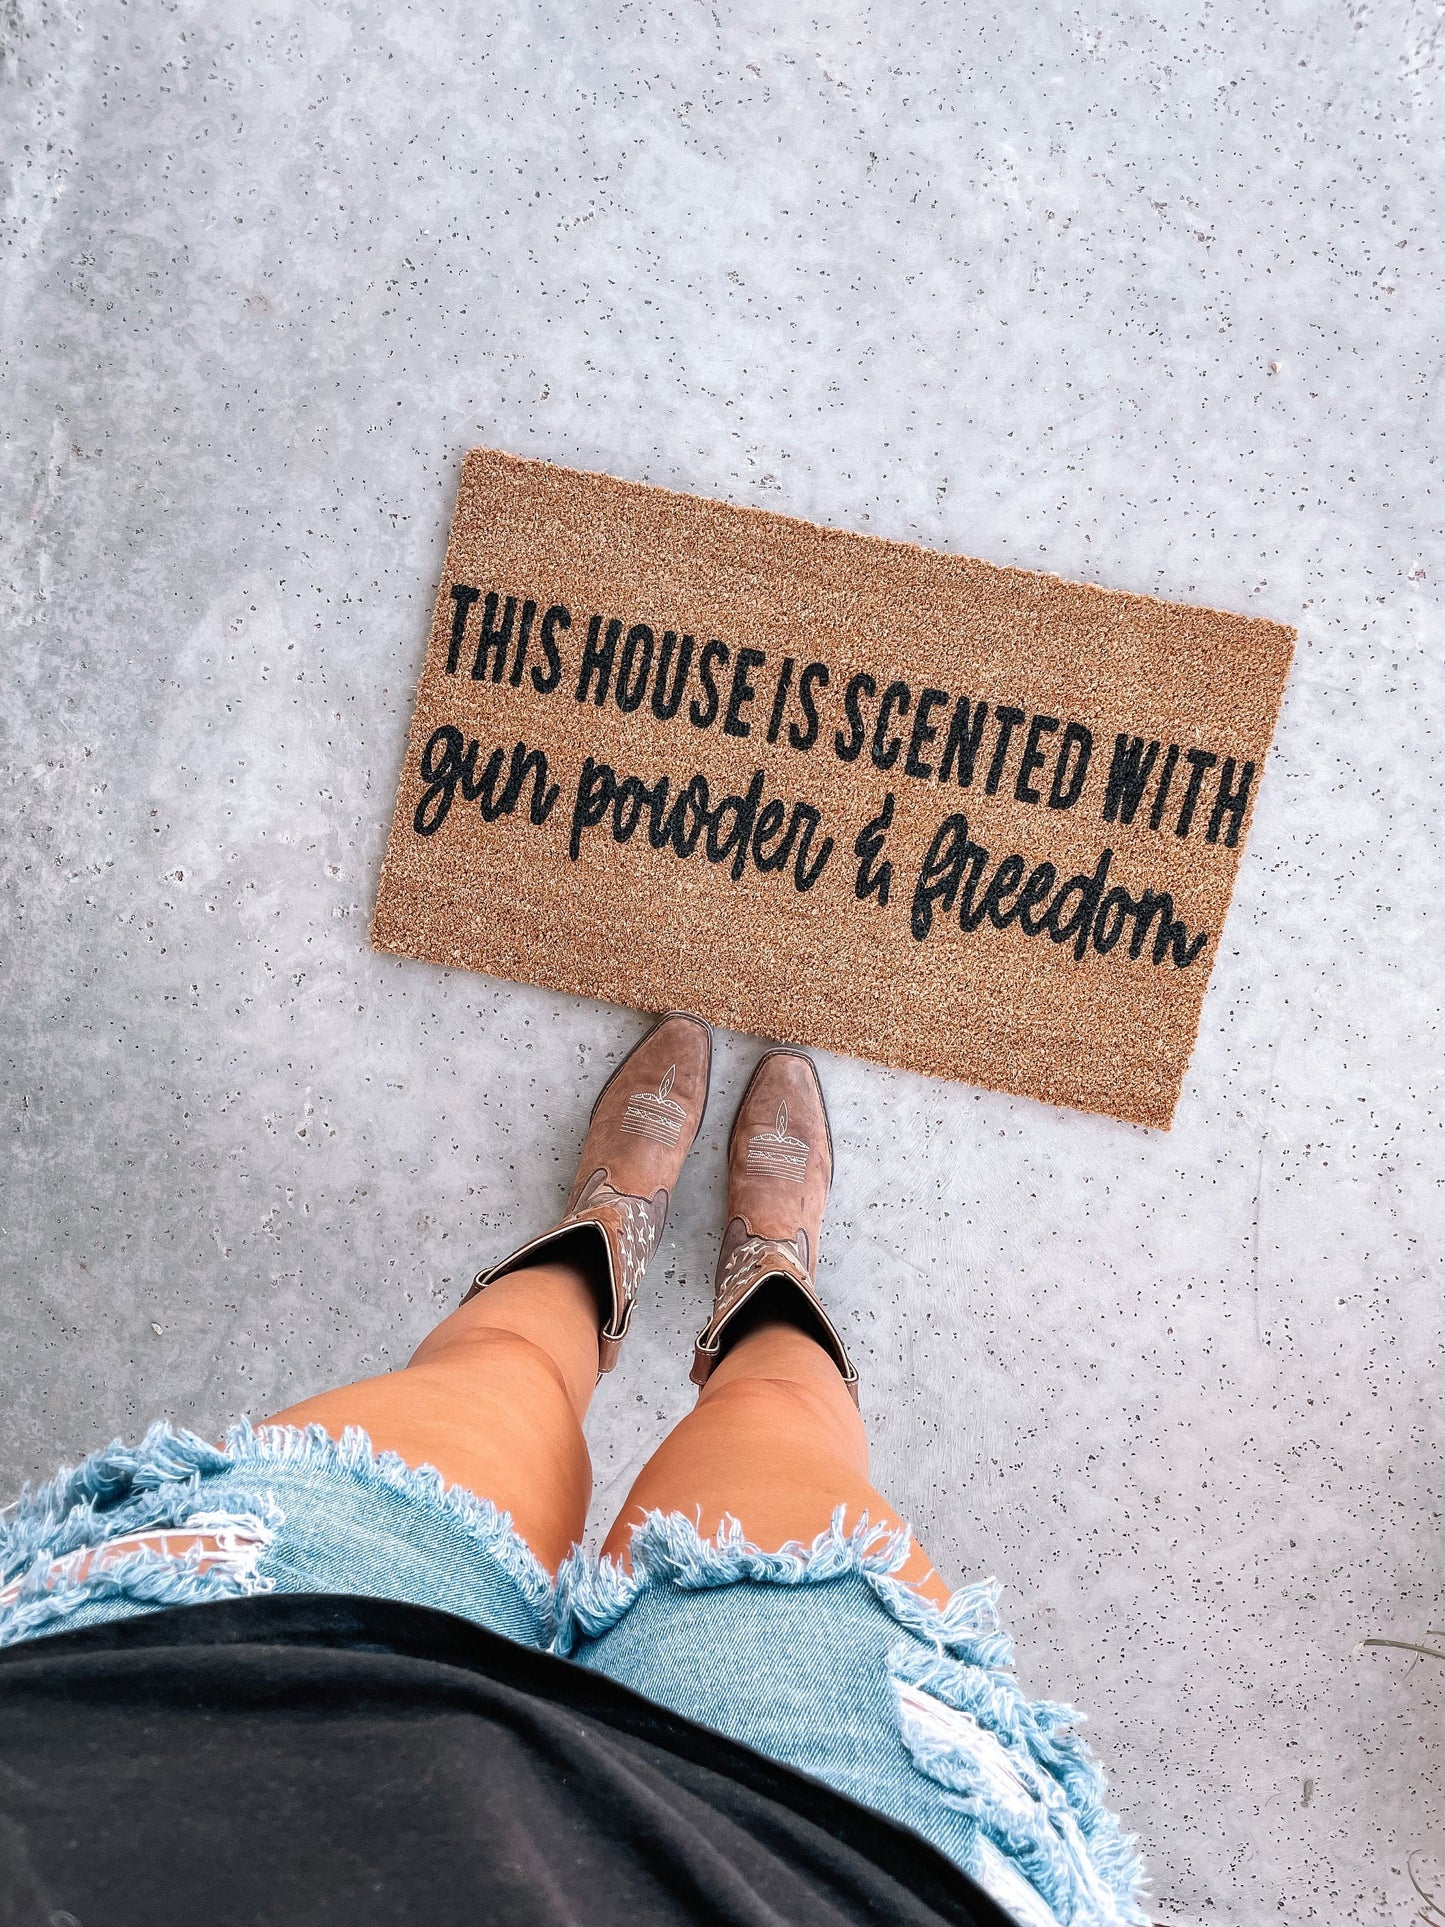 This House Is Scented With Gun Powder & Freedom Doormat